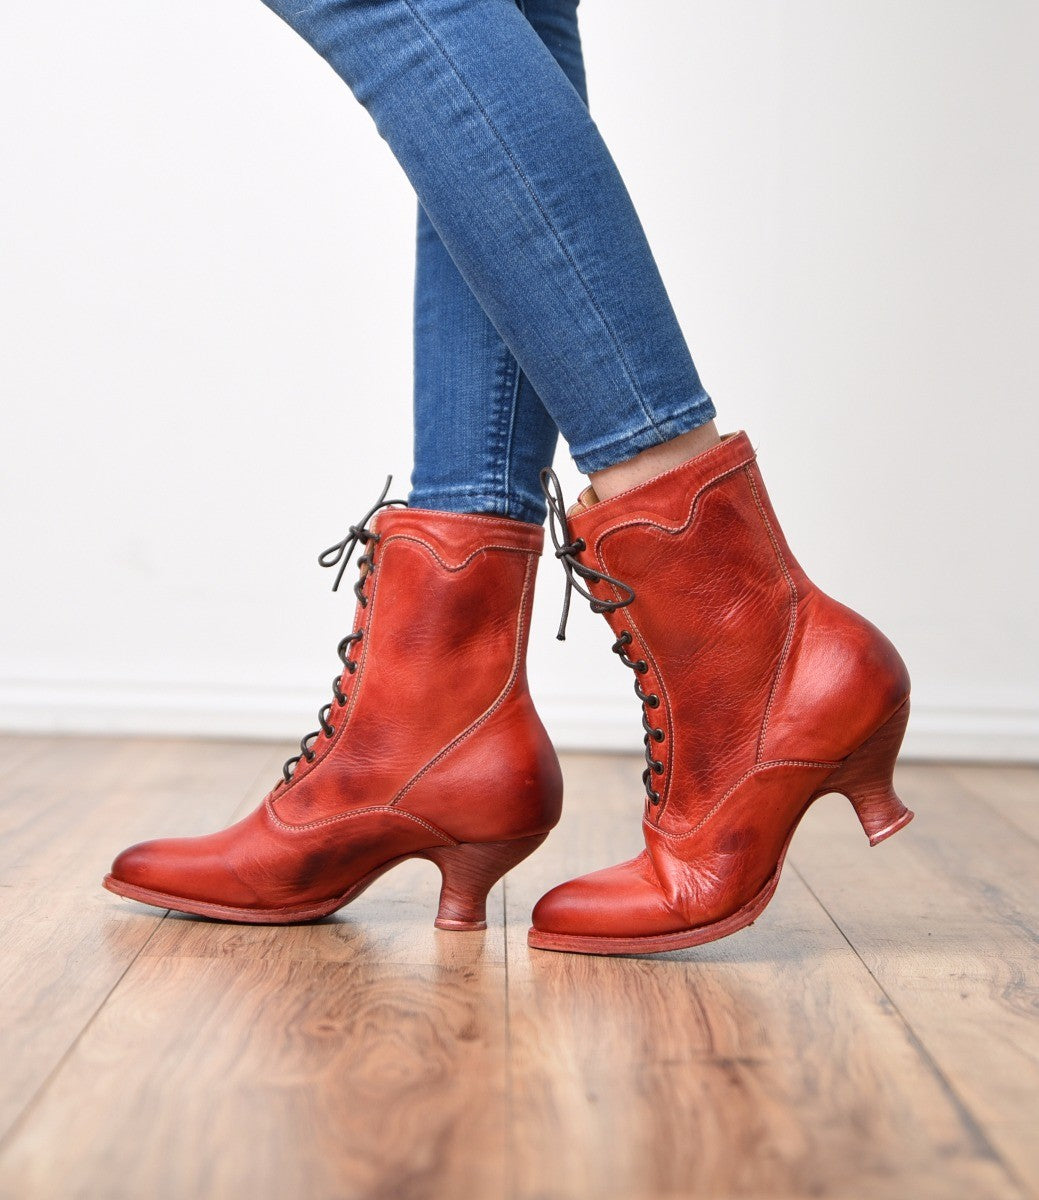 Victorian Style Leather Ankle Boots in Red Rustic